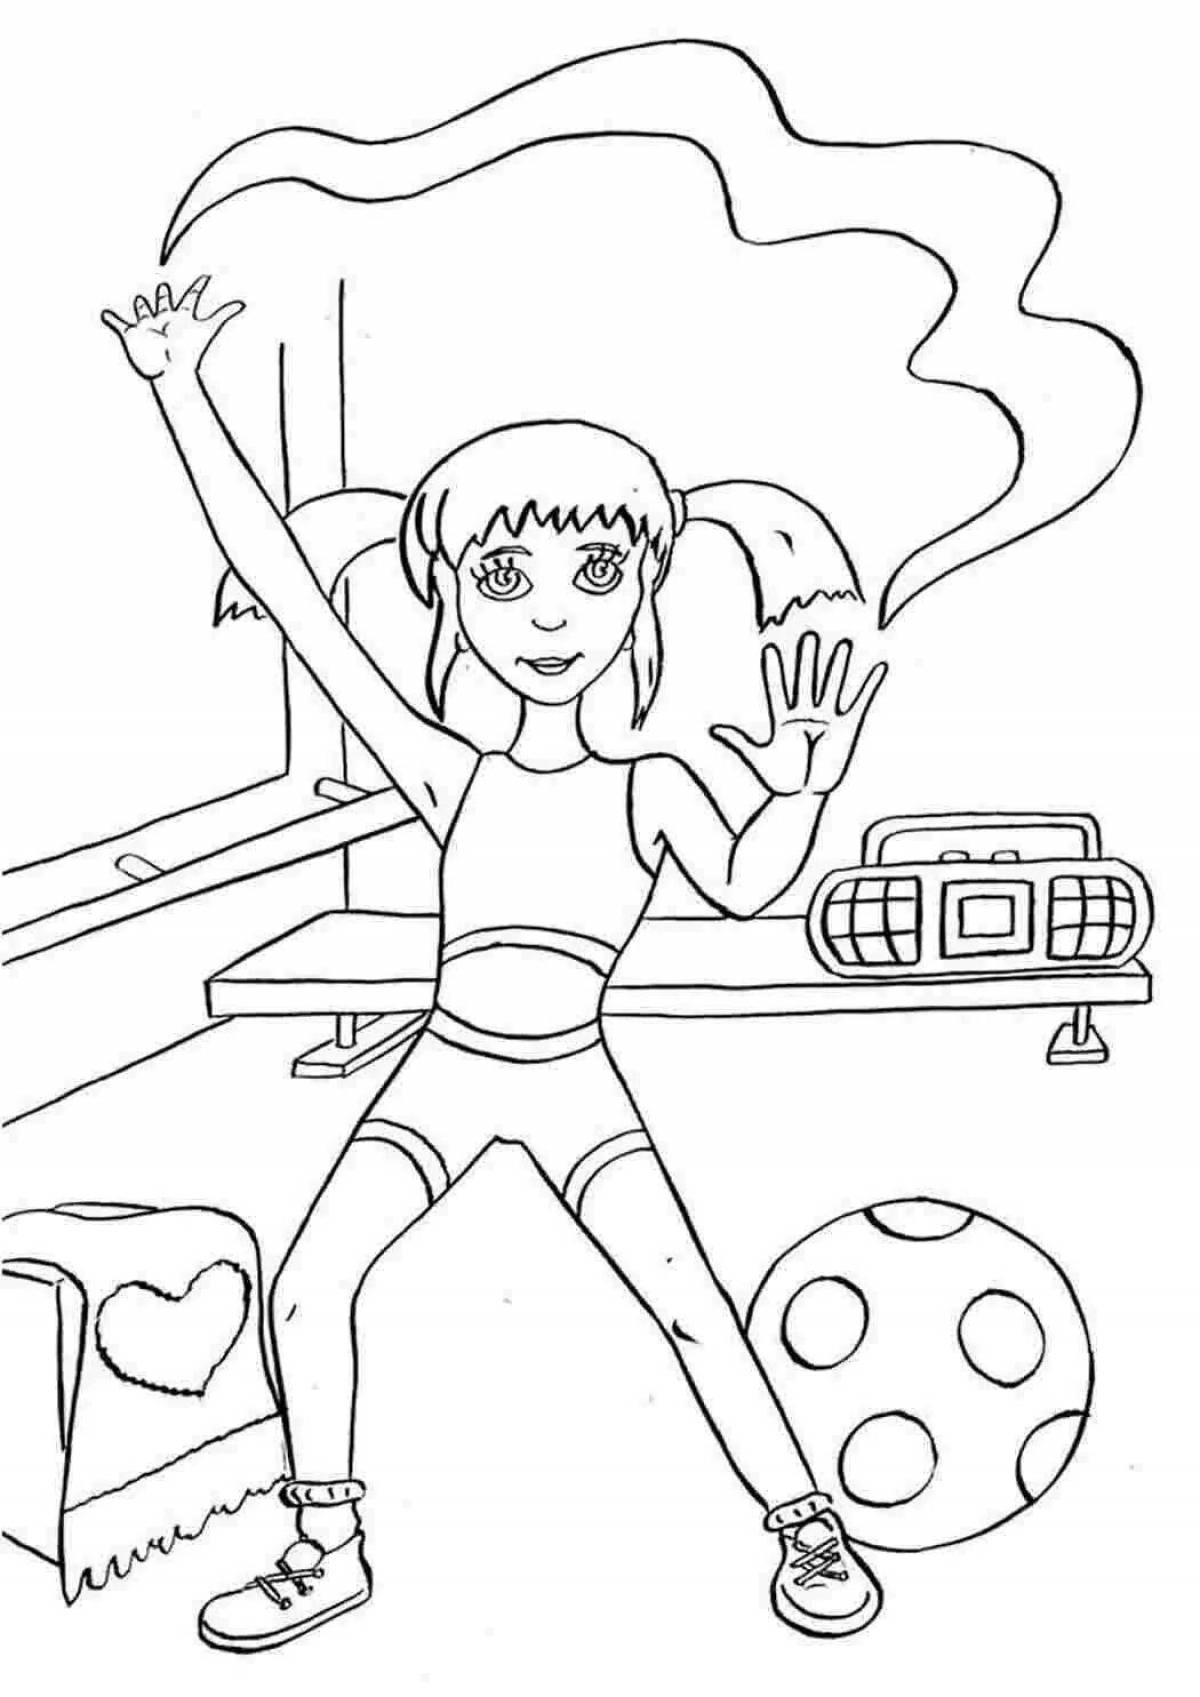 Tempting healthy lifestyle coloring page